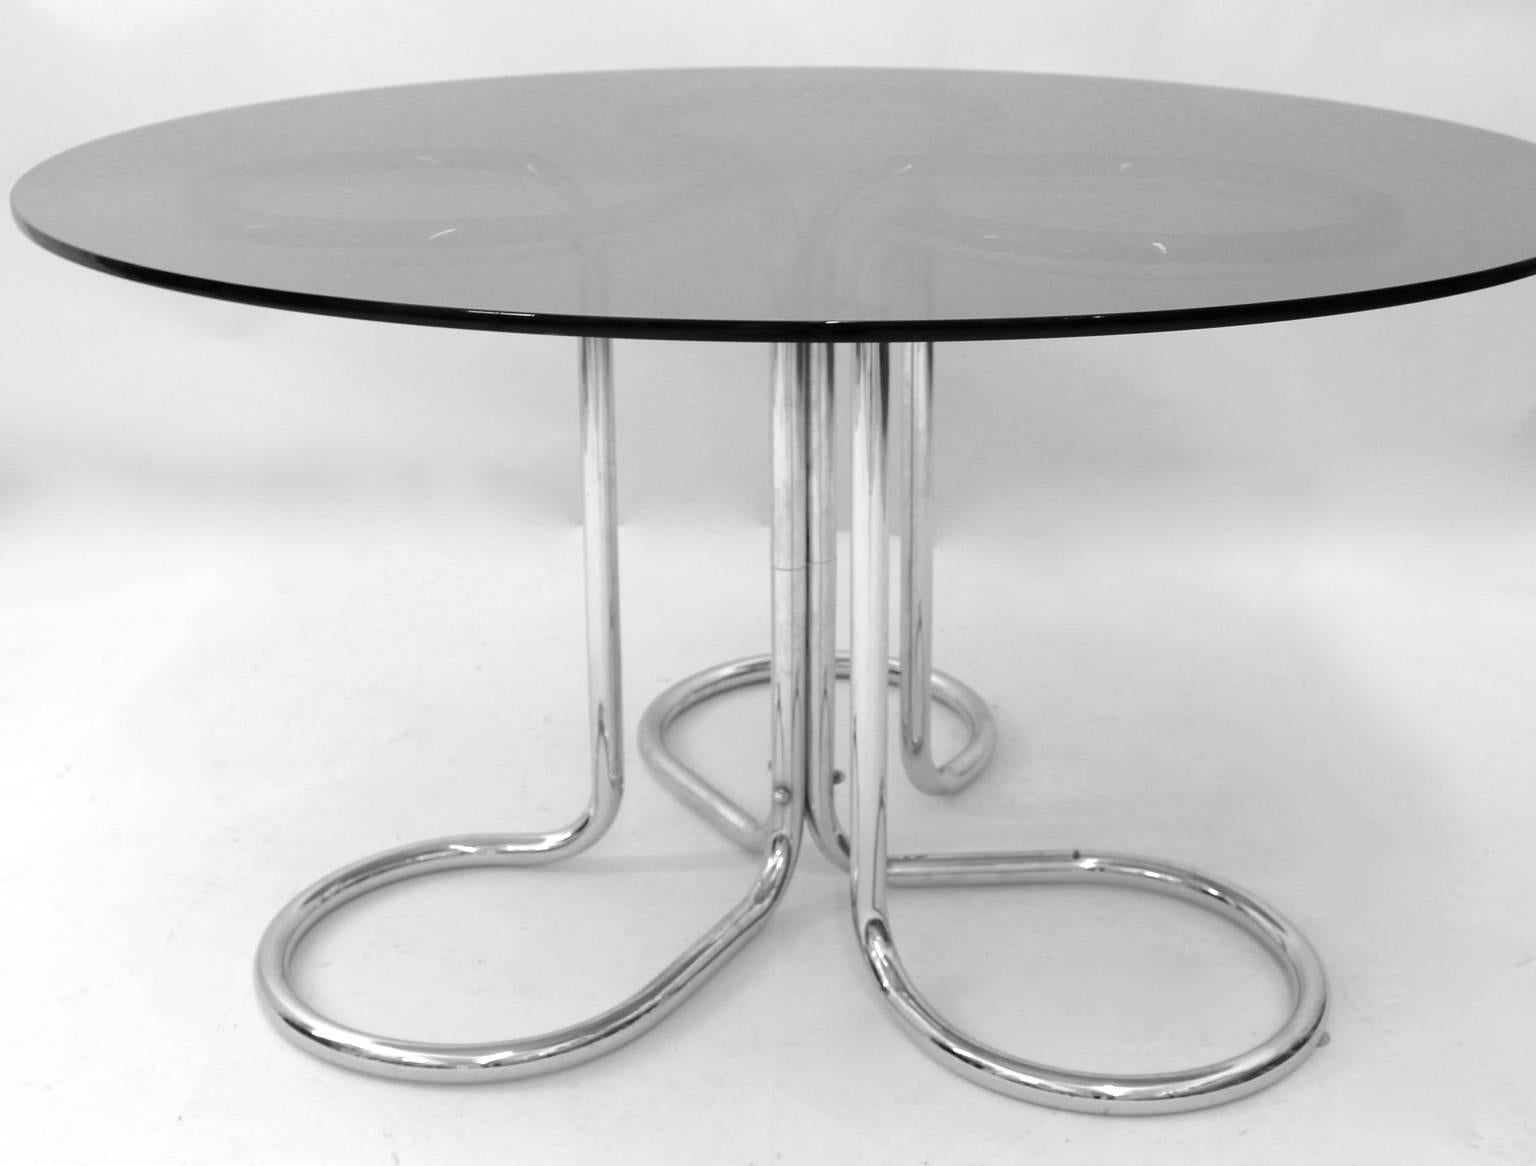 Space age vintage dining table by Giotto Stoppino 1970s Italy, which features a curved chromed steel tube base construction. The dining table is topped with a round smoked glass top.
The original condition is good with signs of age and use like